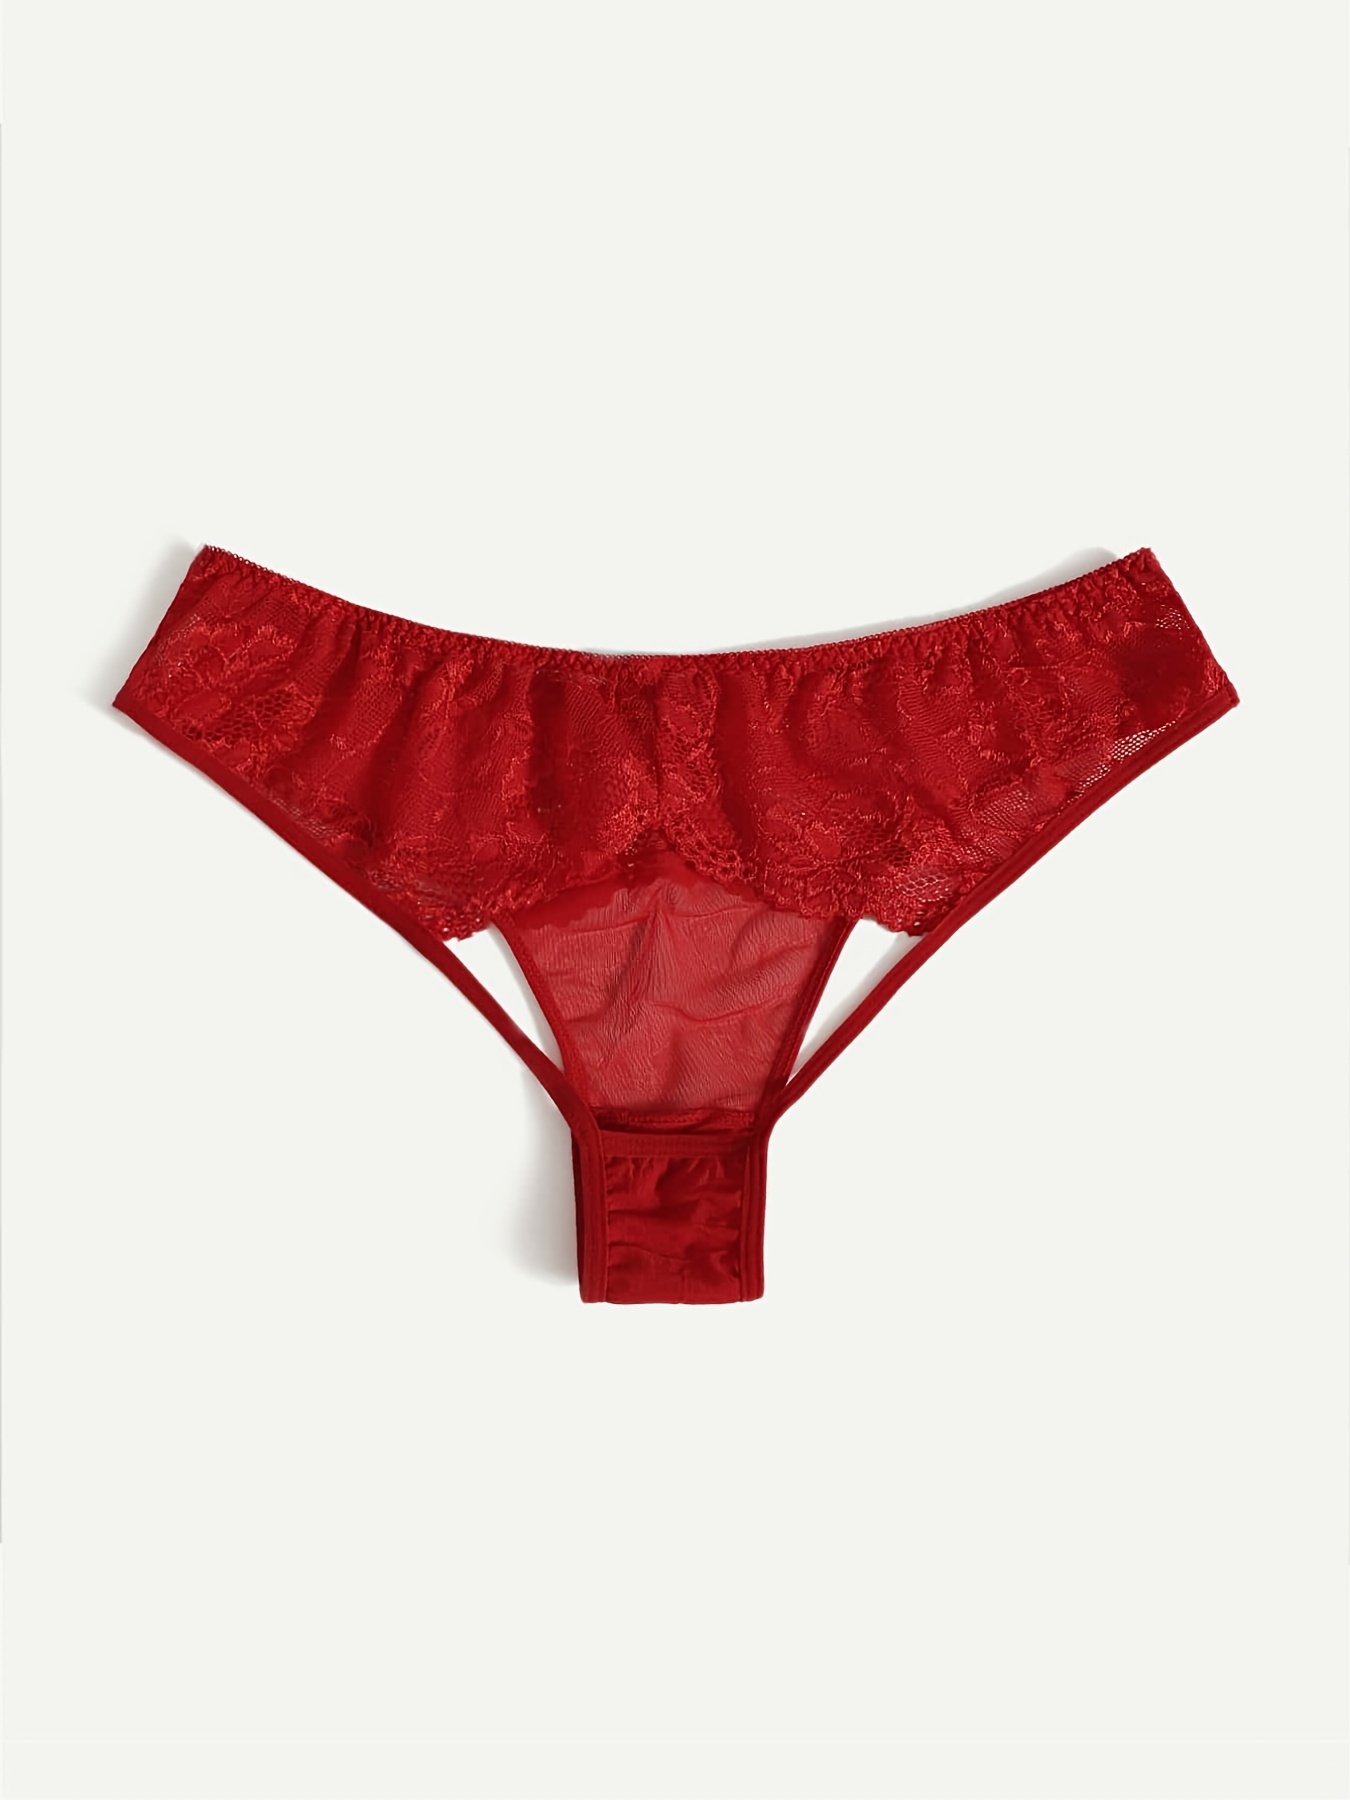 Red Open Crotch Stretch Lace Ladies Sexy Crotchless Panty Briefs